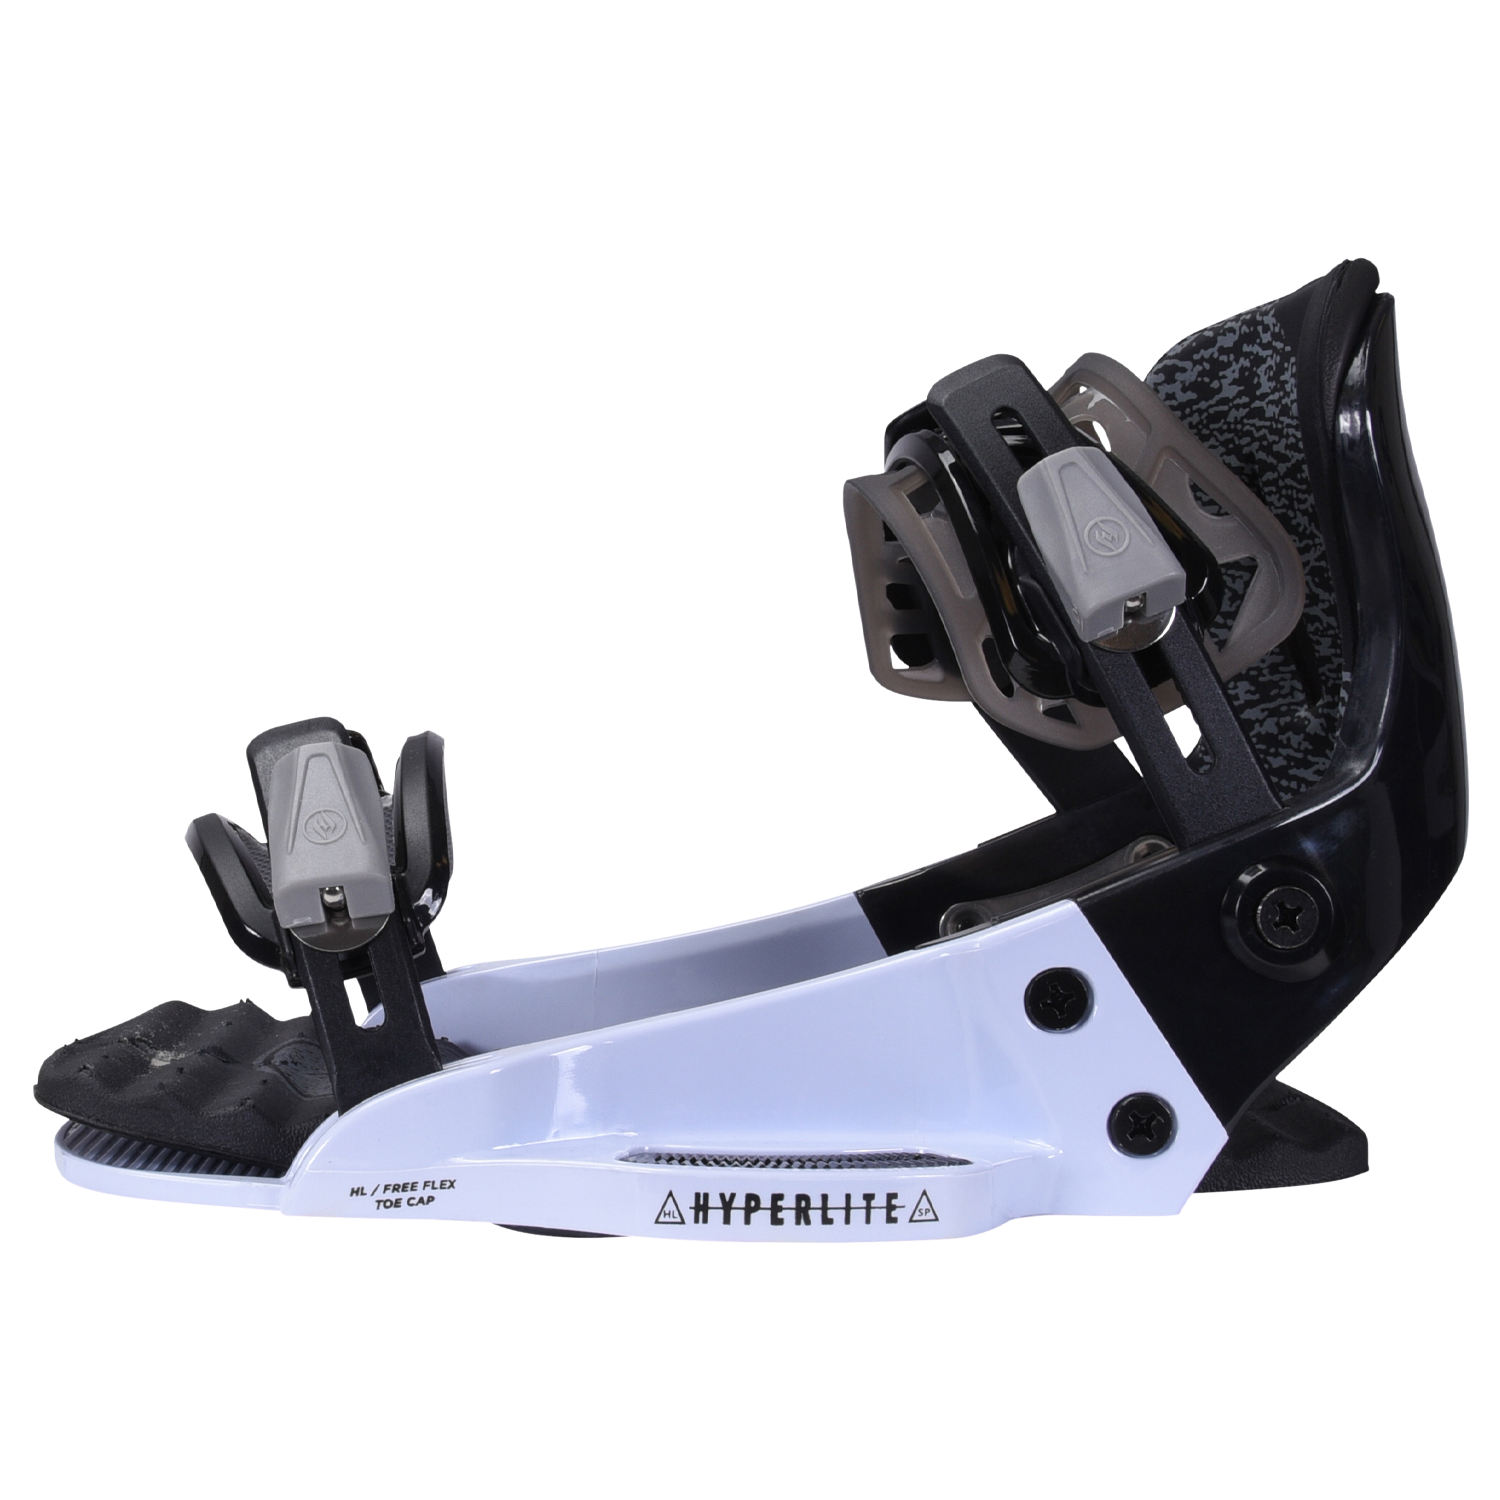 A Comprehensive Overview of Snowboard Binding Parts